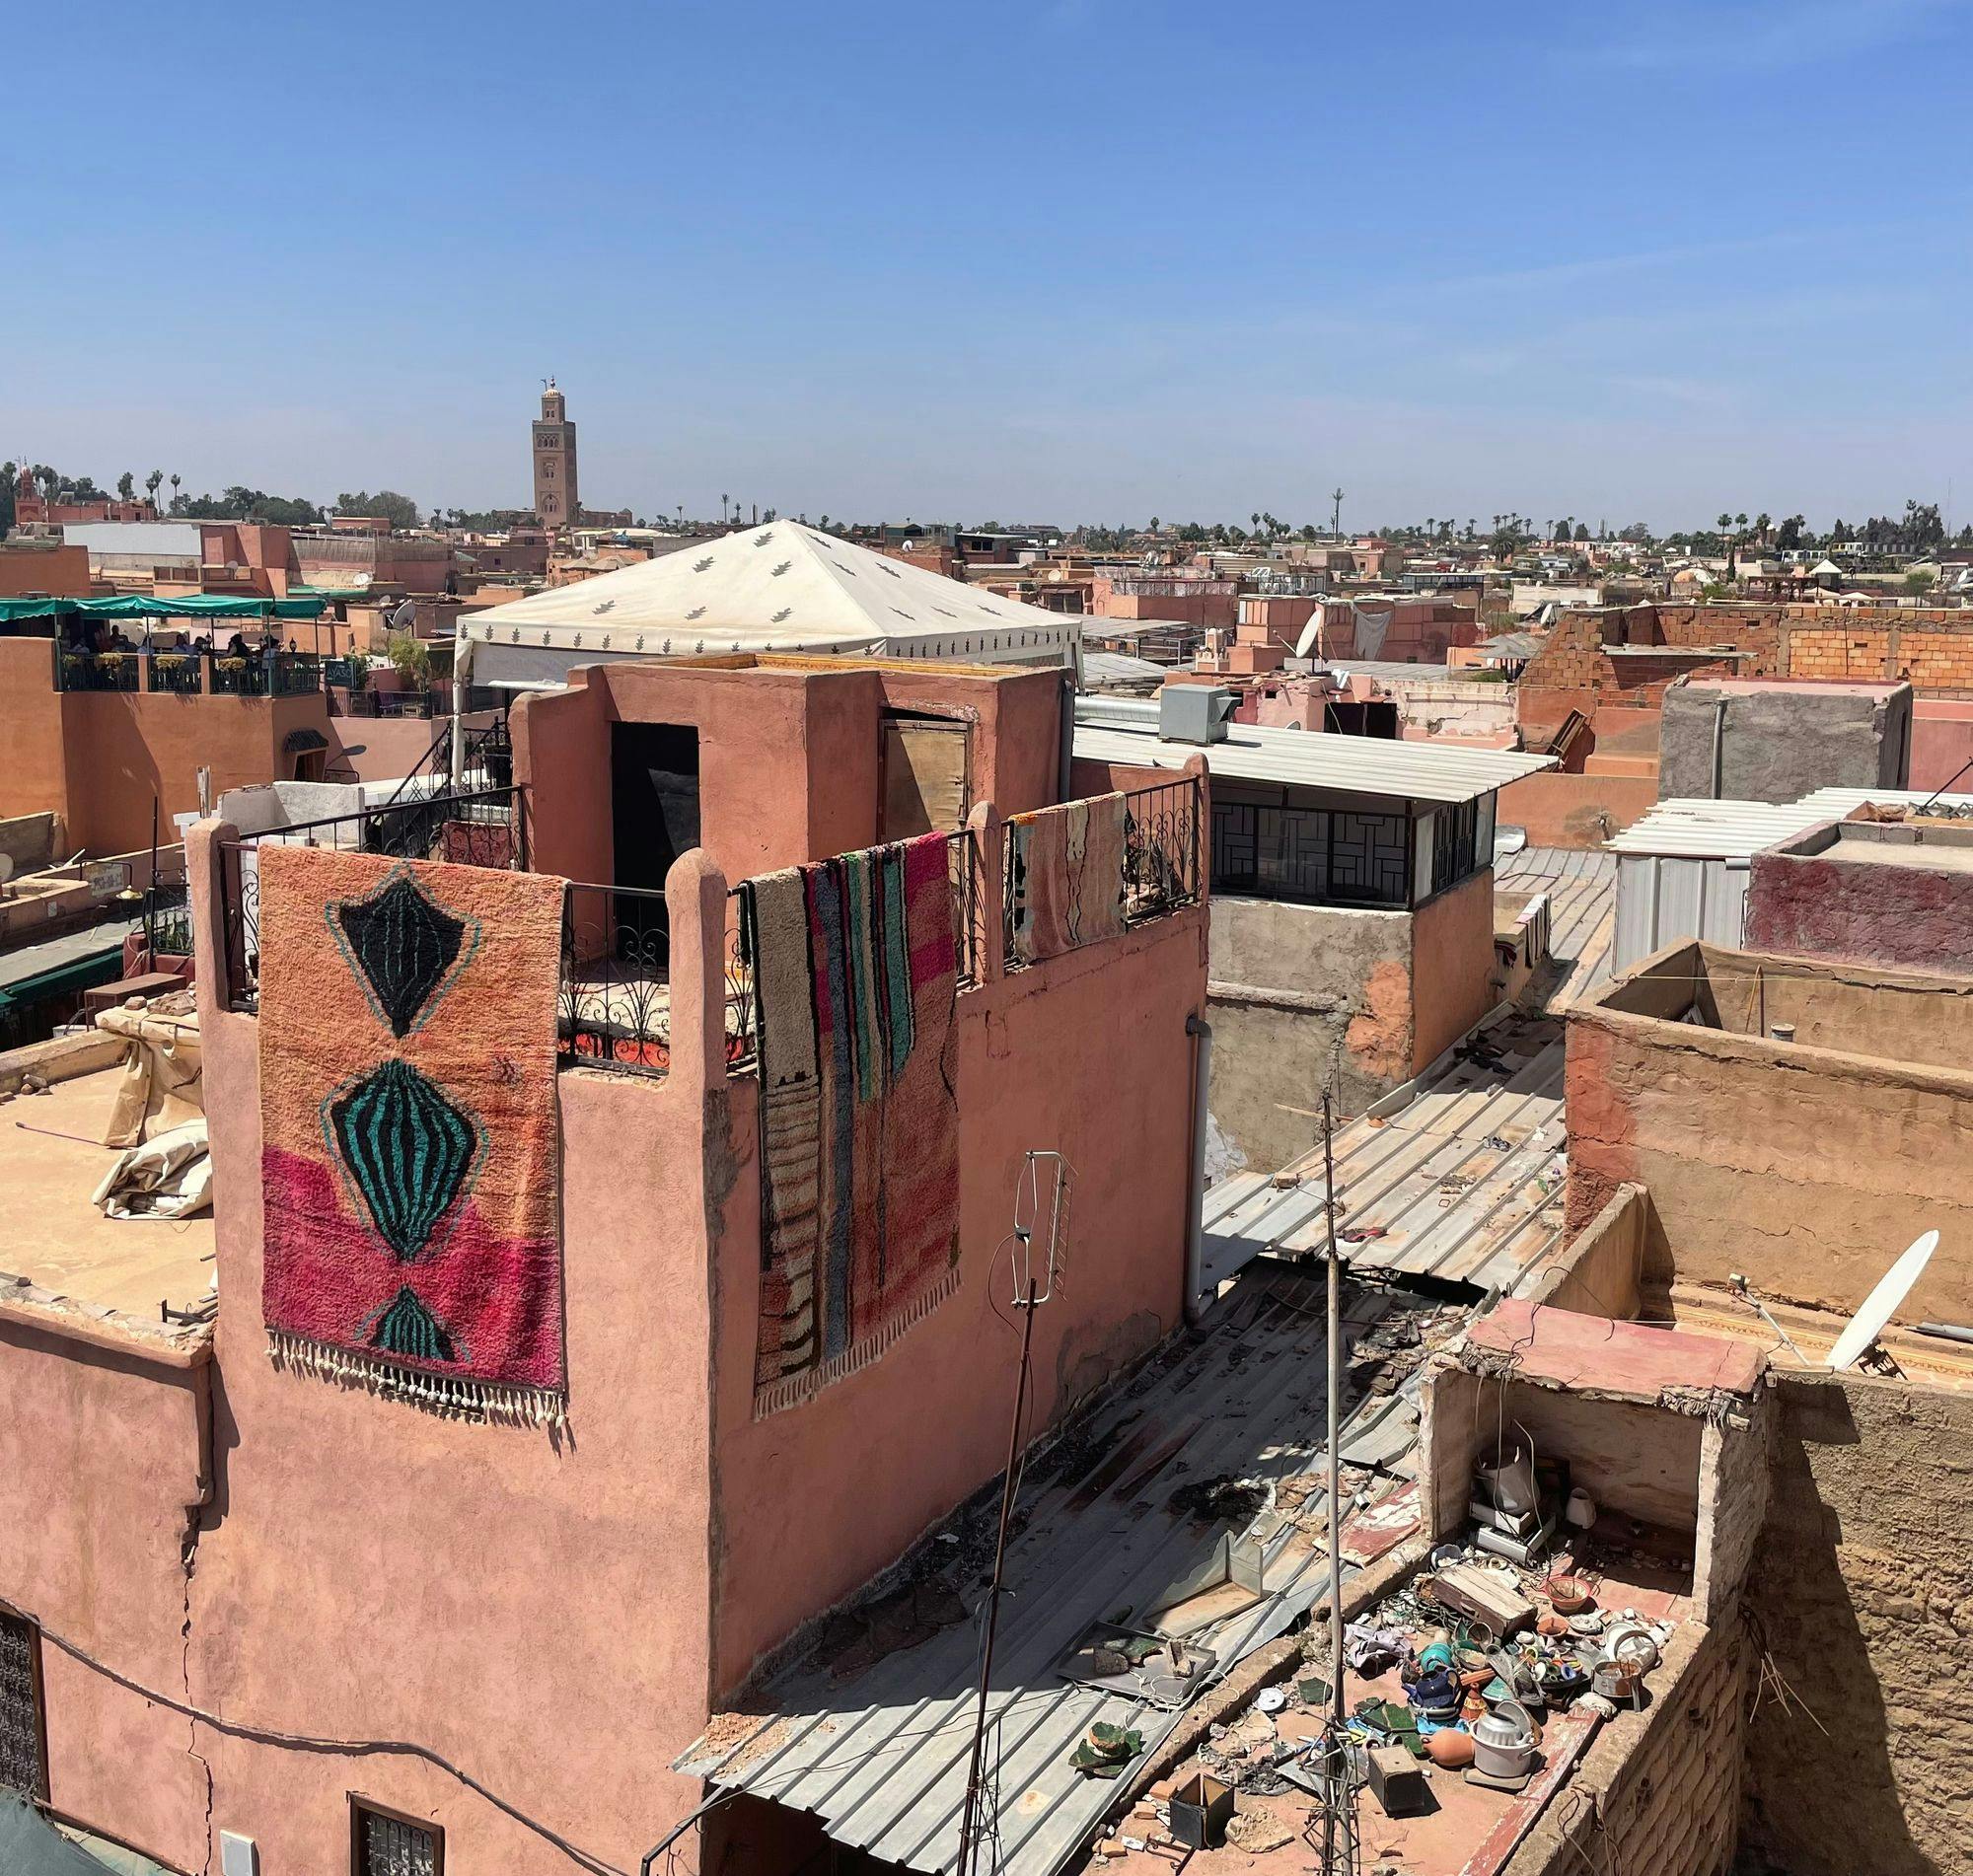 A picture from the rooftop restaurant Shtatto down on the market of Medina